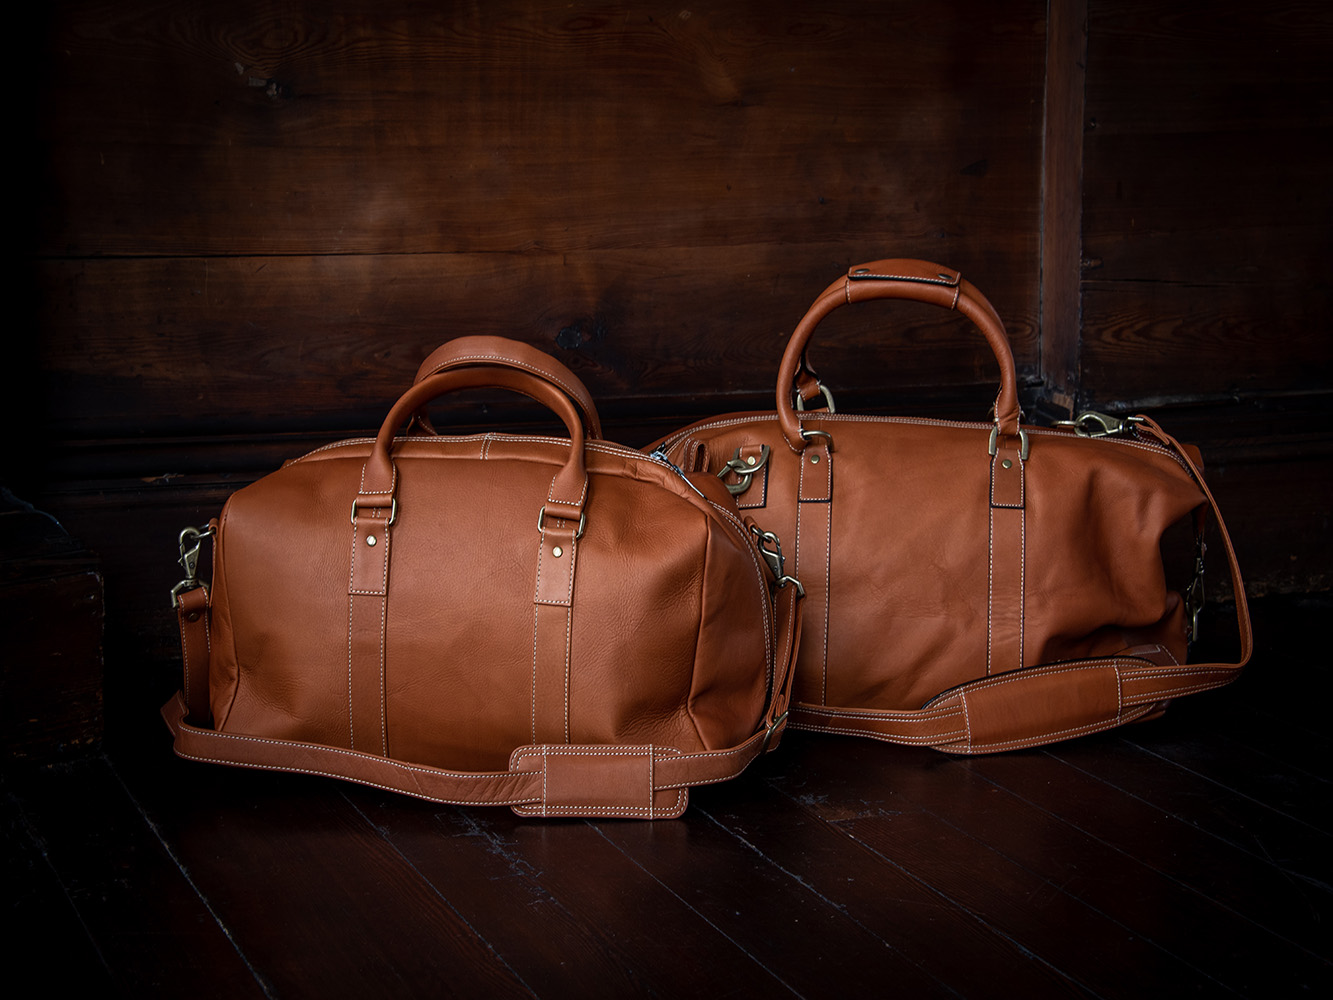 Links & Kings Links Premium Leather Stand Bags